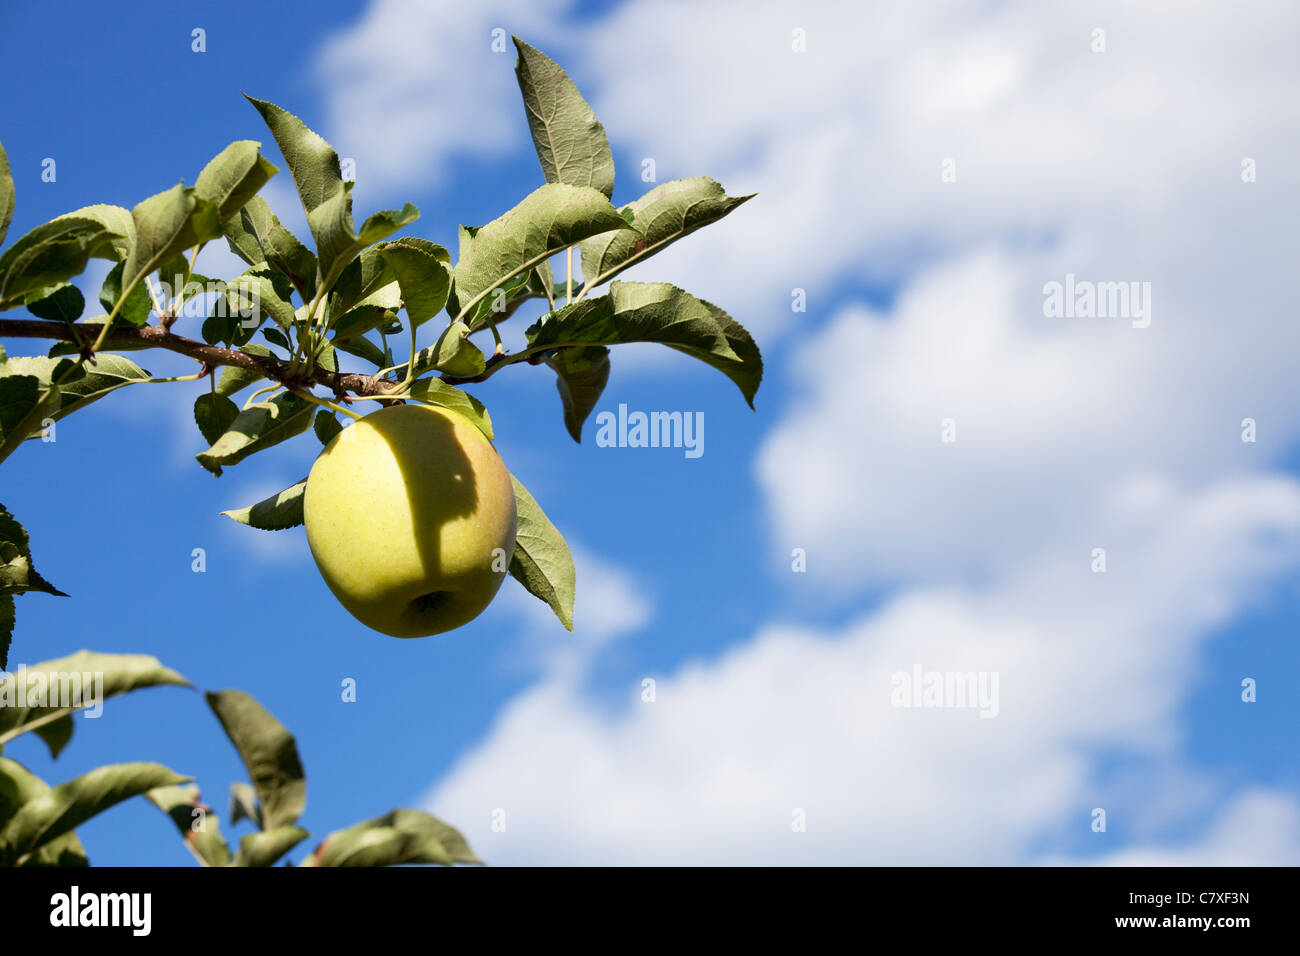 golden delicious apple on a branch against a blue sky with clouds Stock Photo